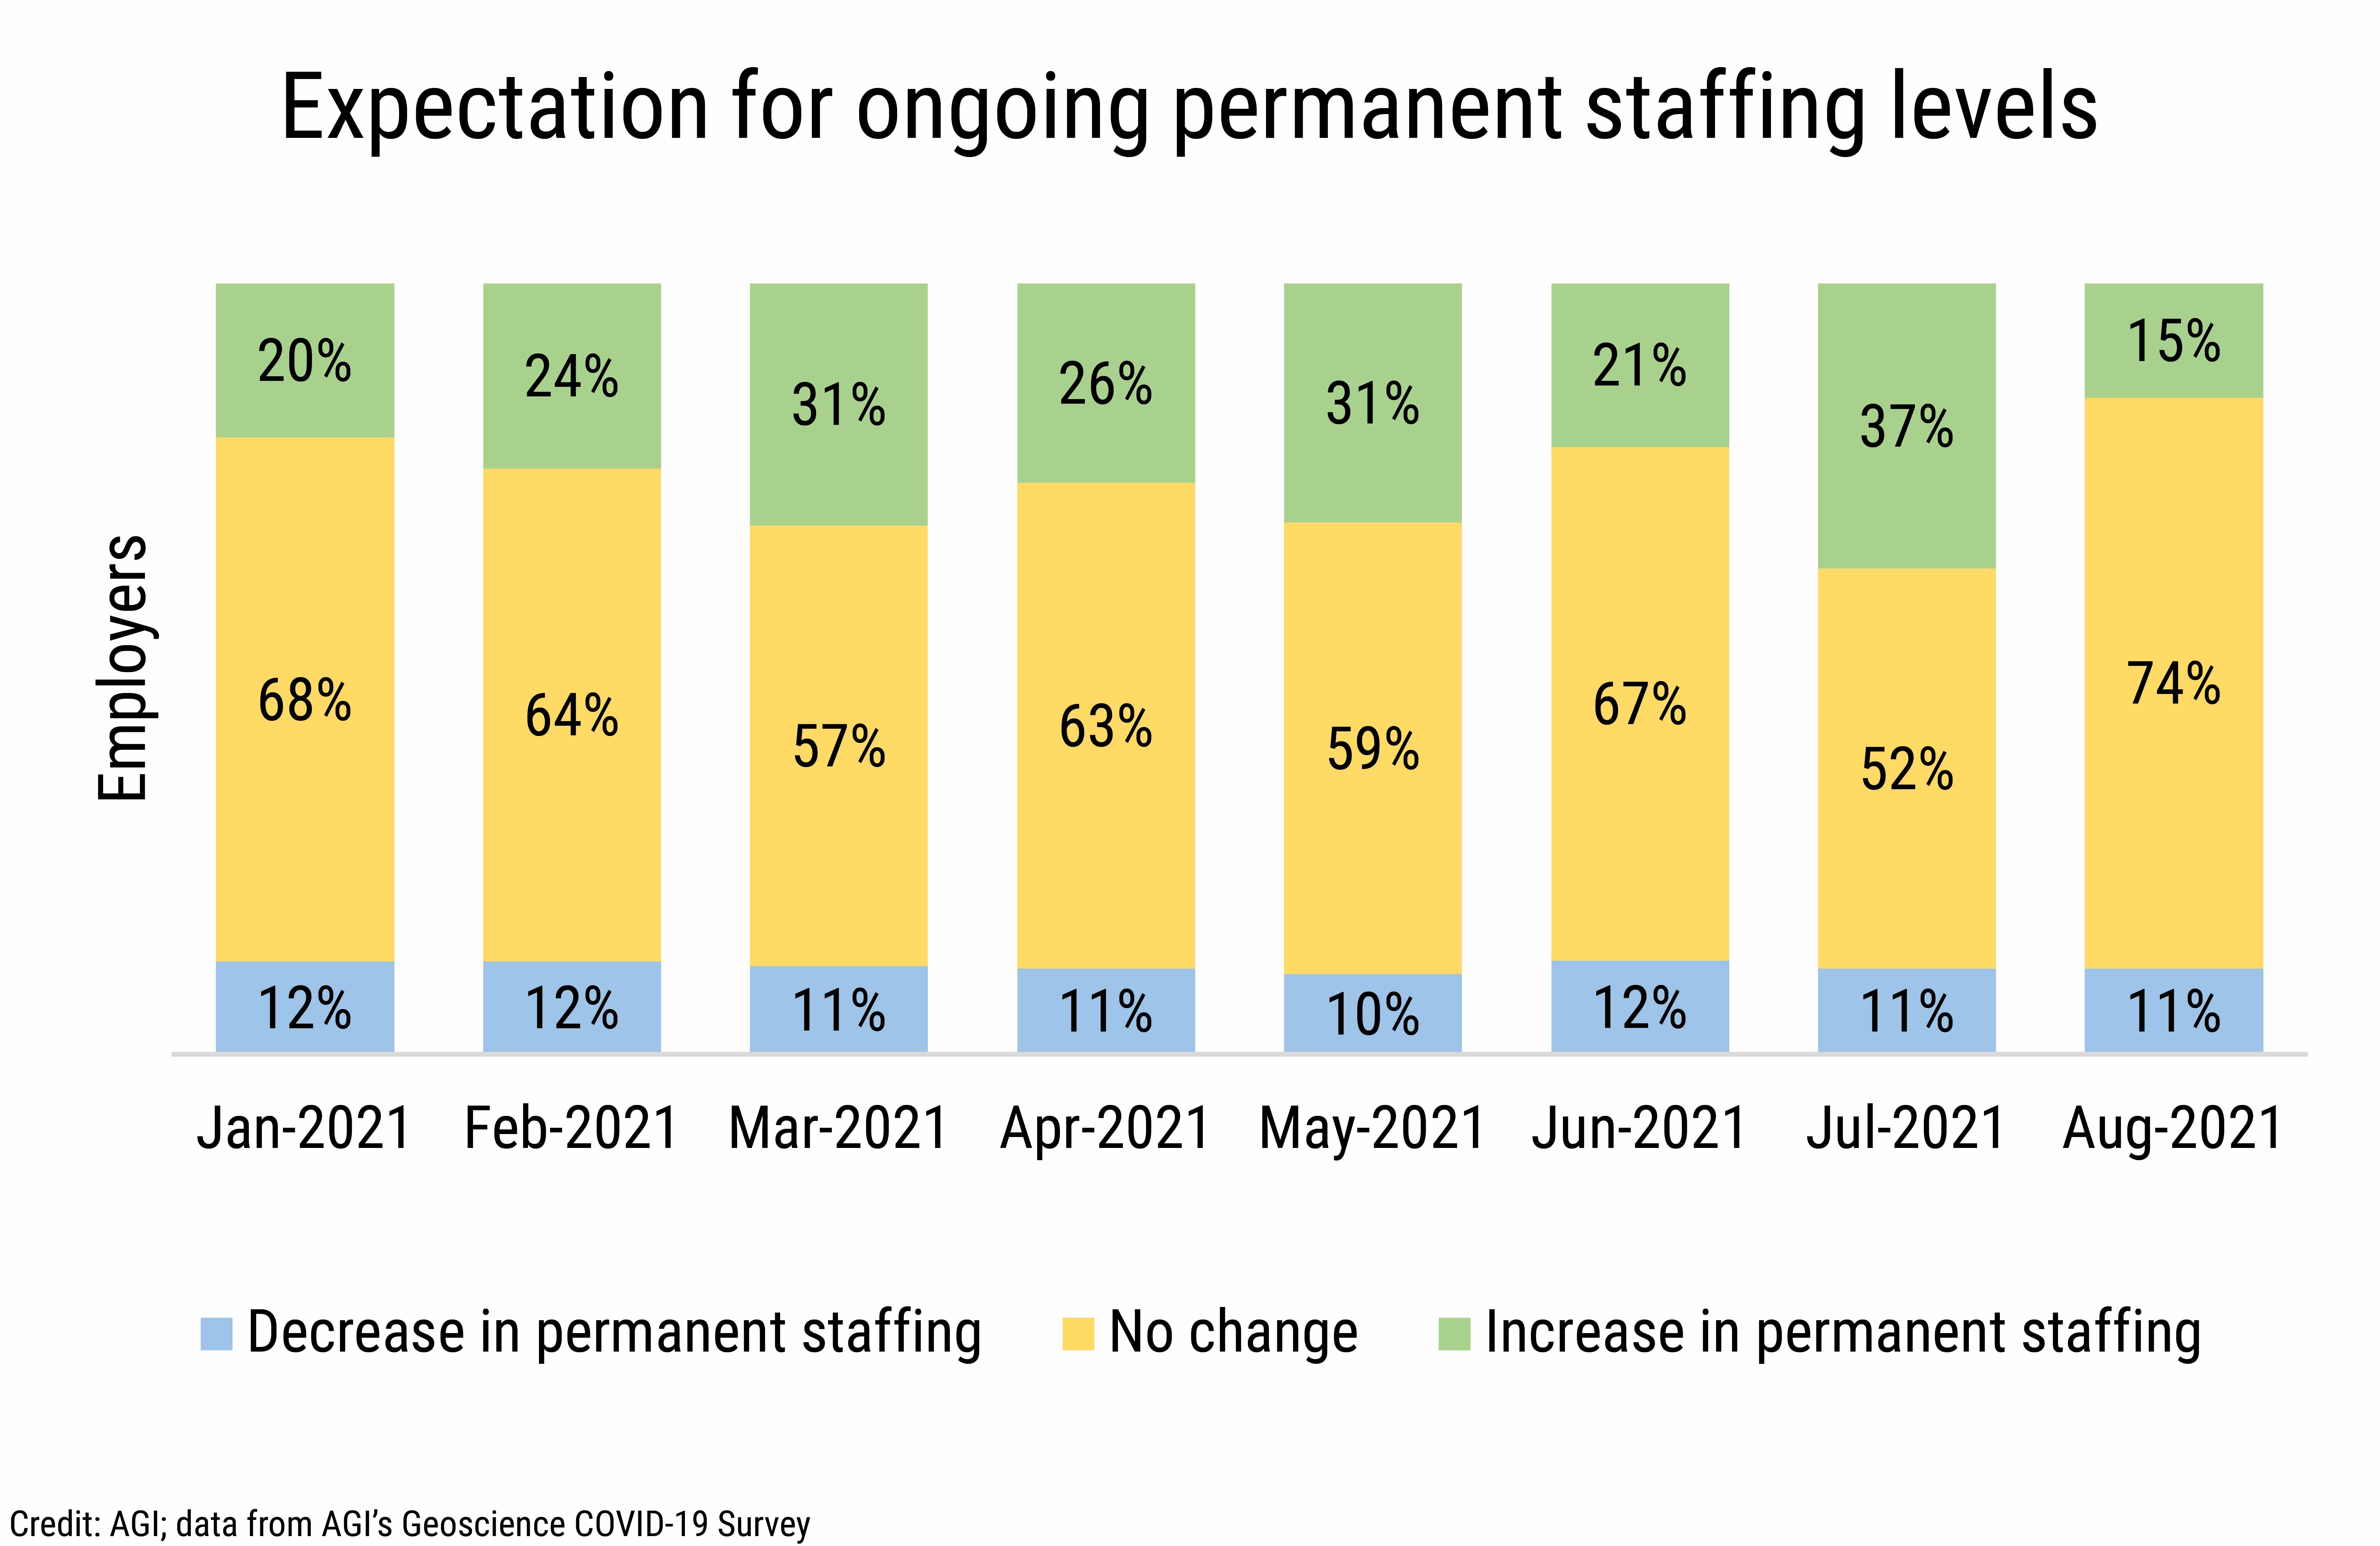 DB_2021-030 chart 01: Expectation for ongoing permanent staffing levels (Credit: AGI; data from AGI's Geoscience COVID-19 Survey)